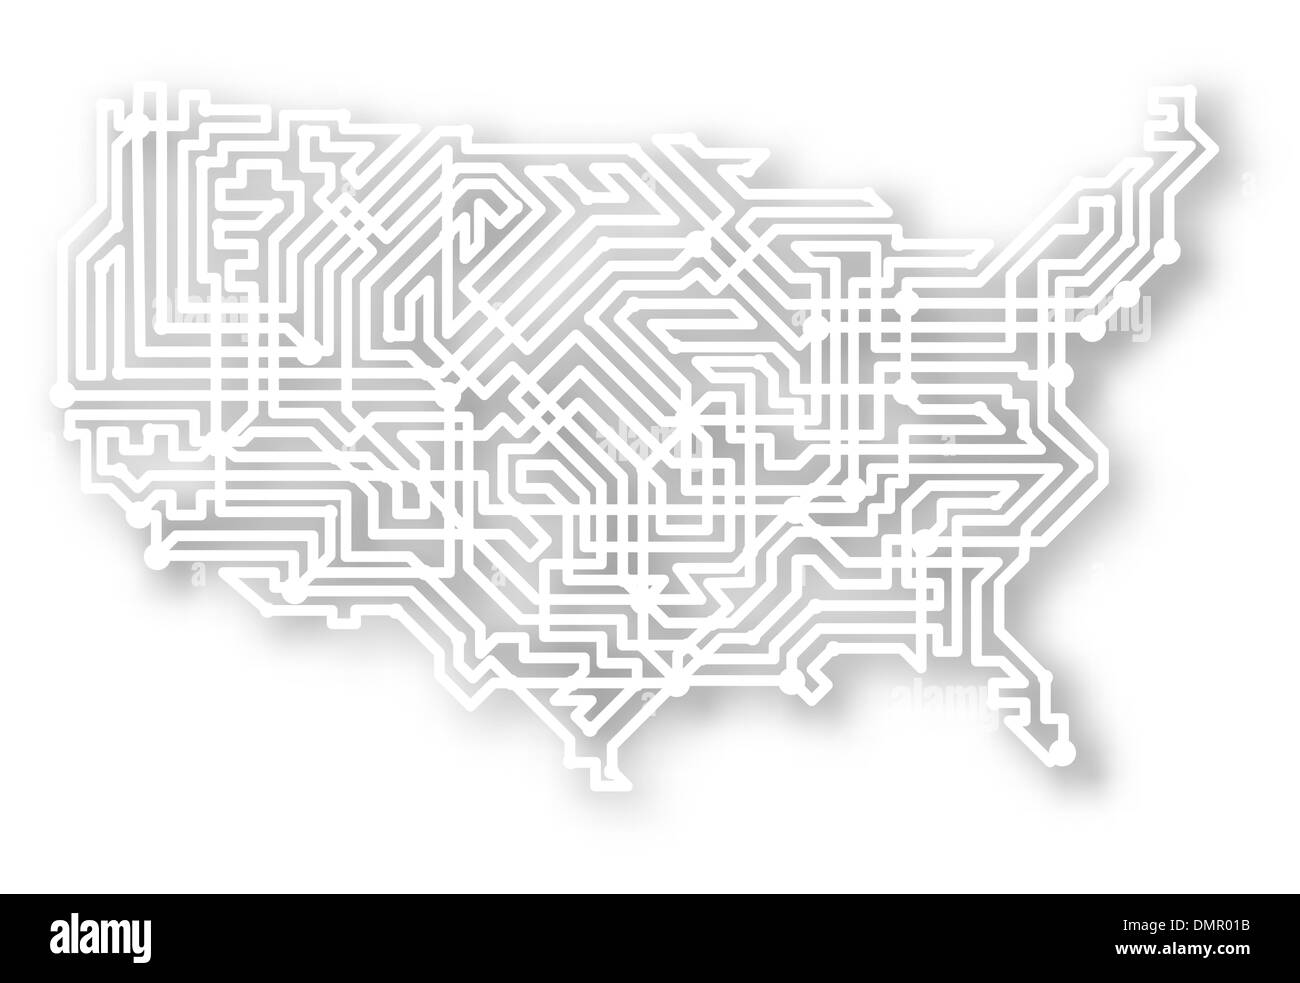 Stylized USA map Stock Vector